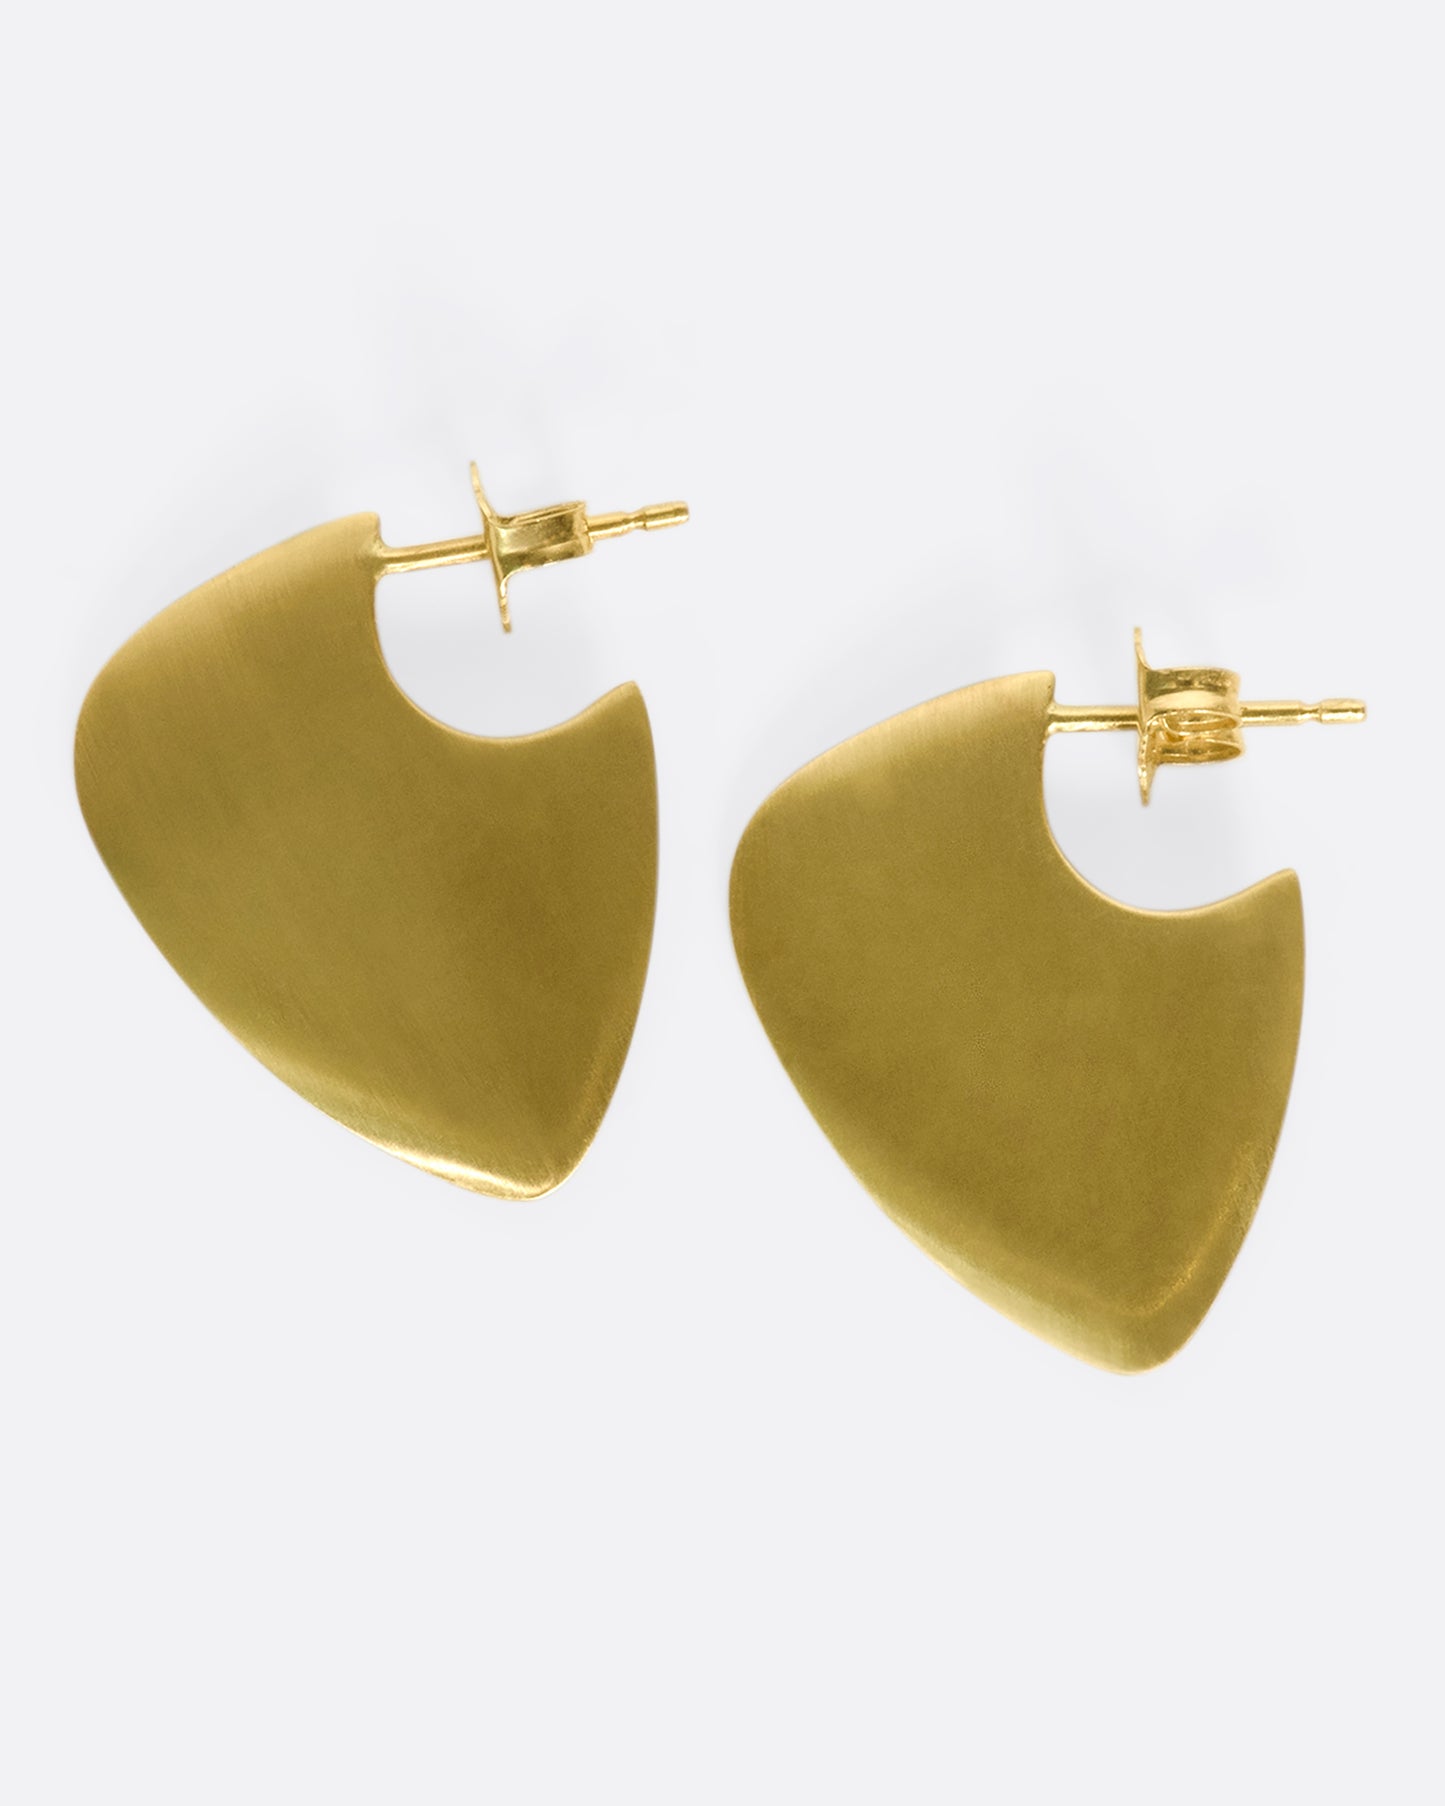 A pair of 10k solid gold hoop earrings with a guitar pick shape.